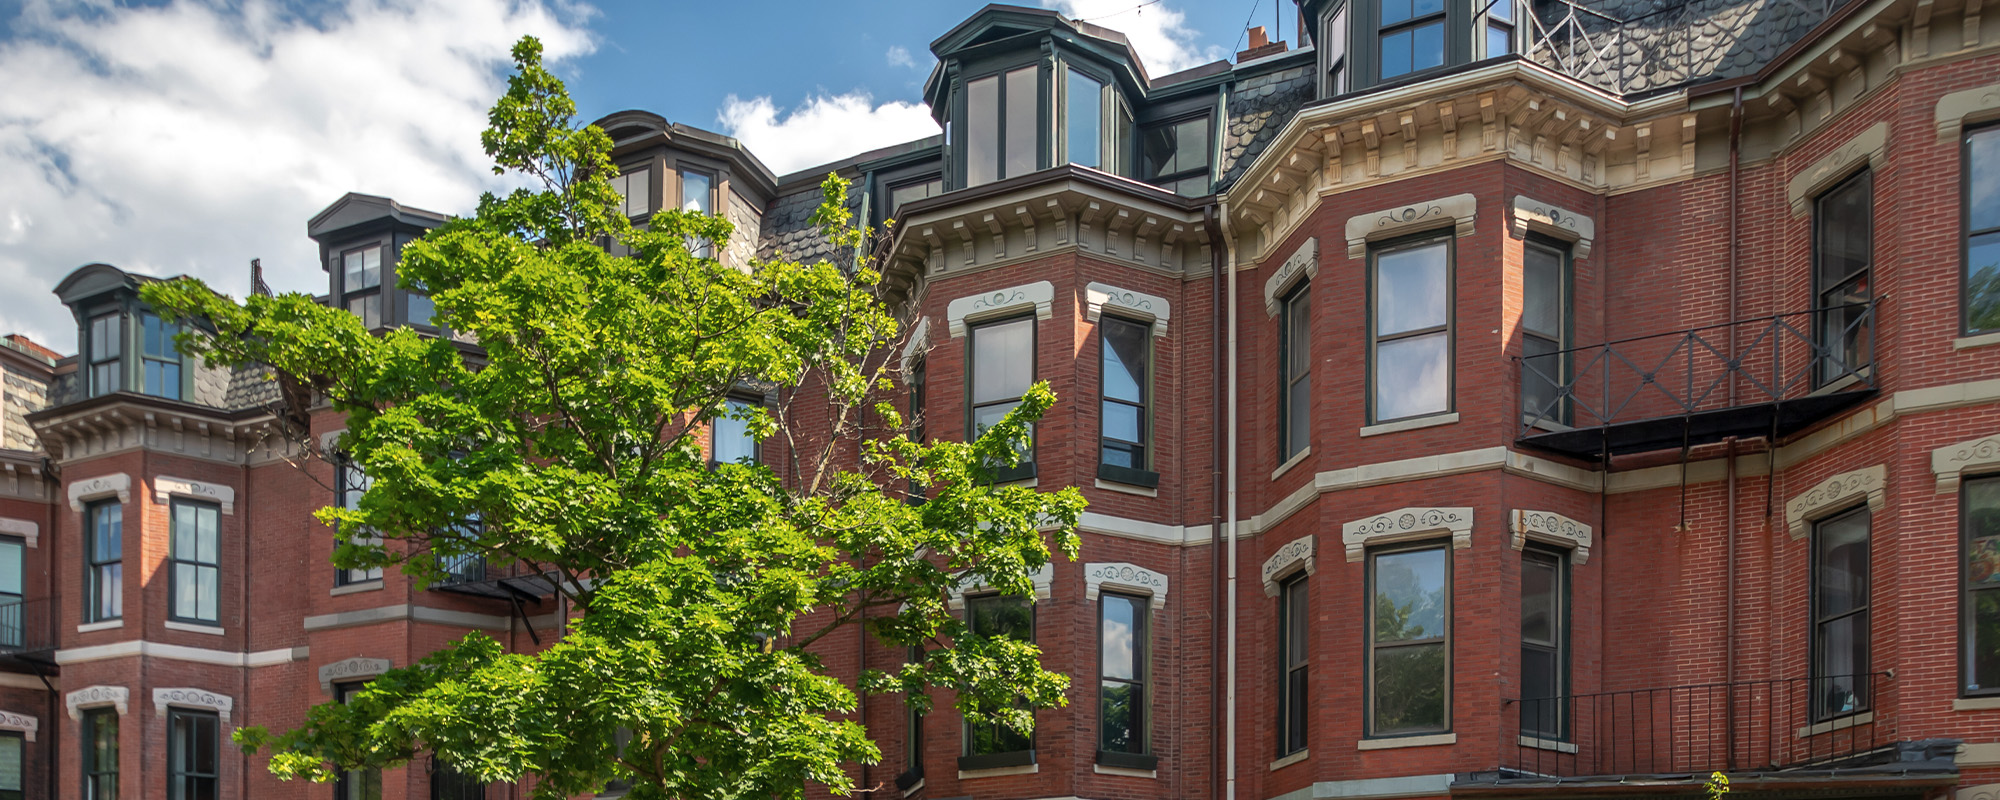 luxury rowhouses in the south end of boston